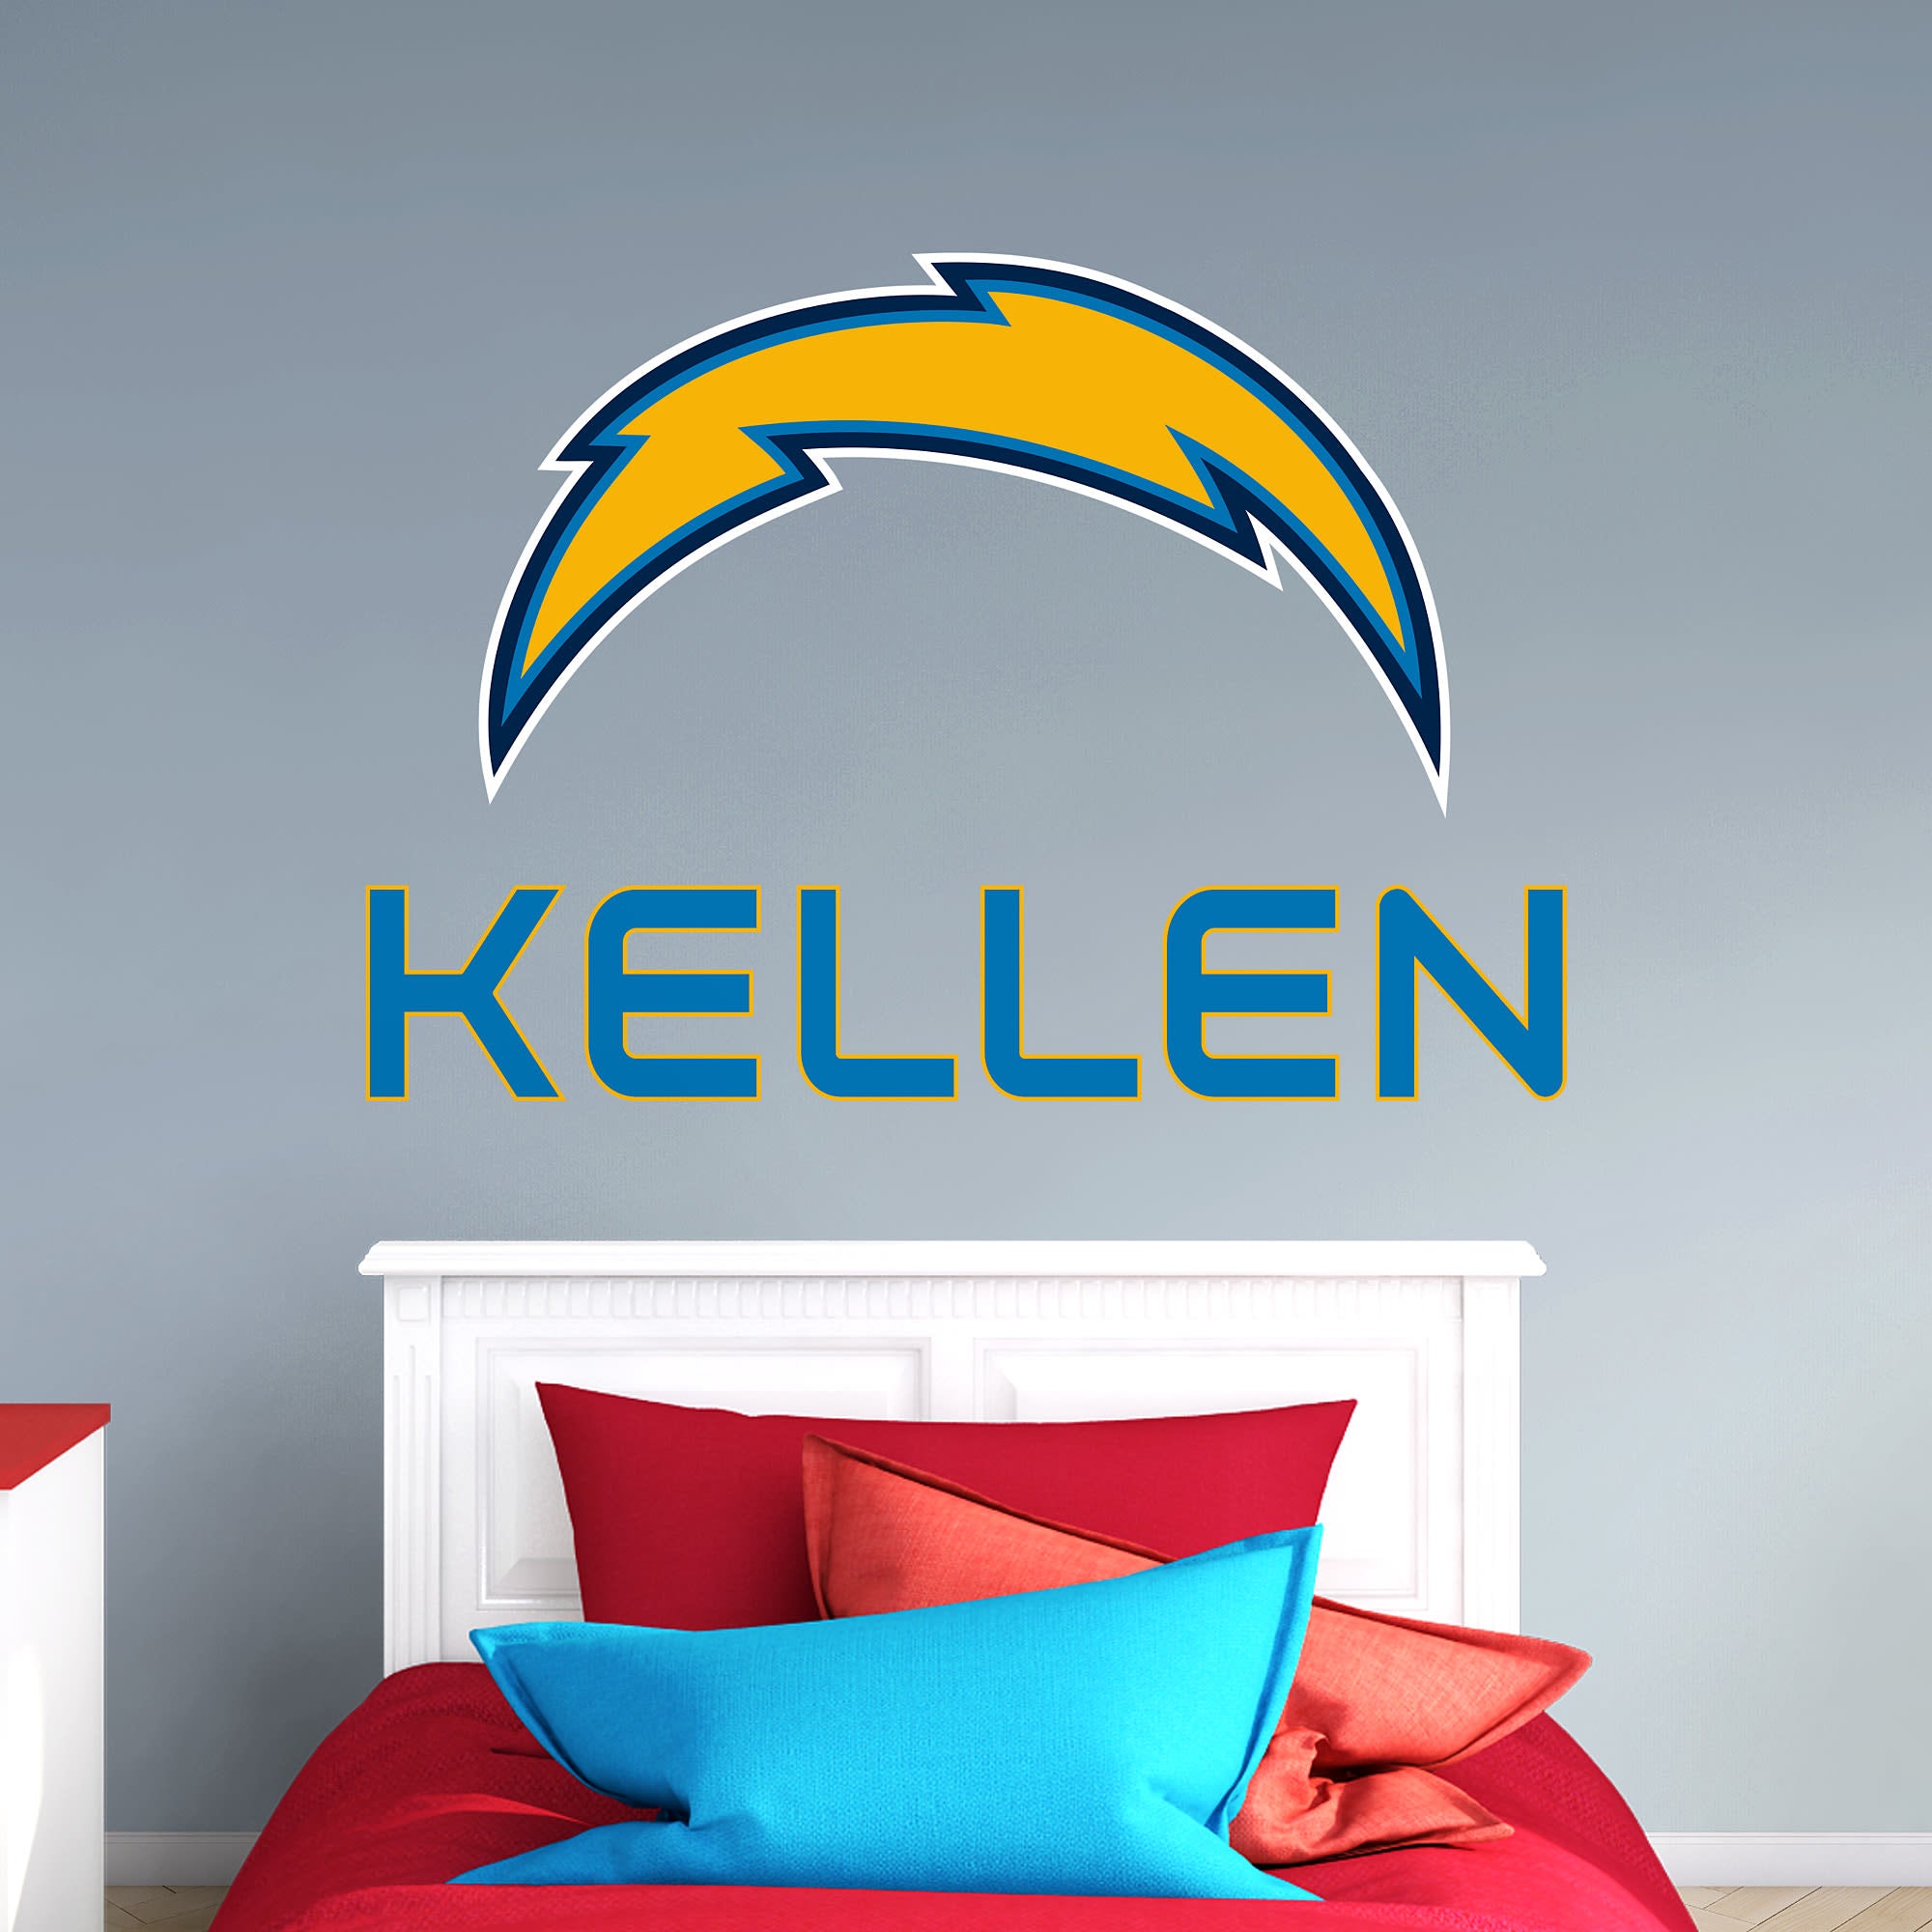 Los Angeles Chargers: Stacked Personalized Name - Officially Licensed NFL Transfer Decal in Powder Blue (52"W x 39.5"H) by Fathe